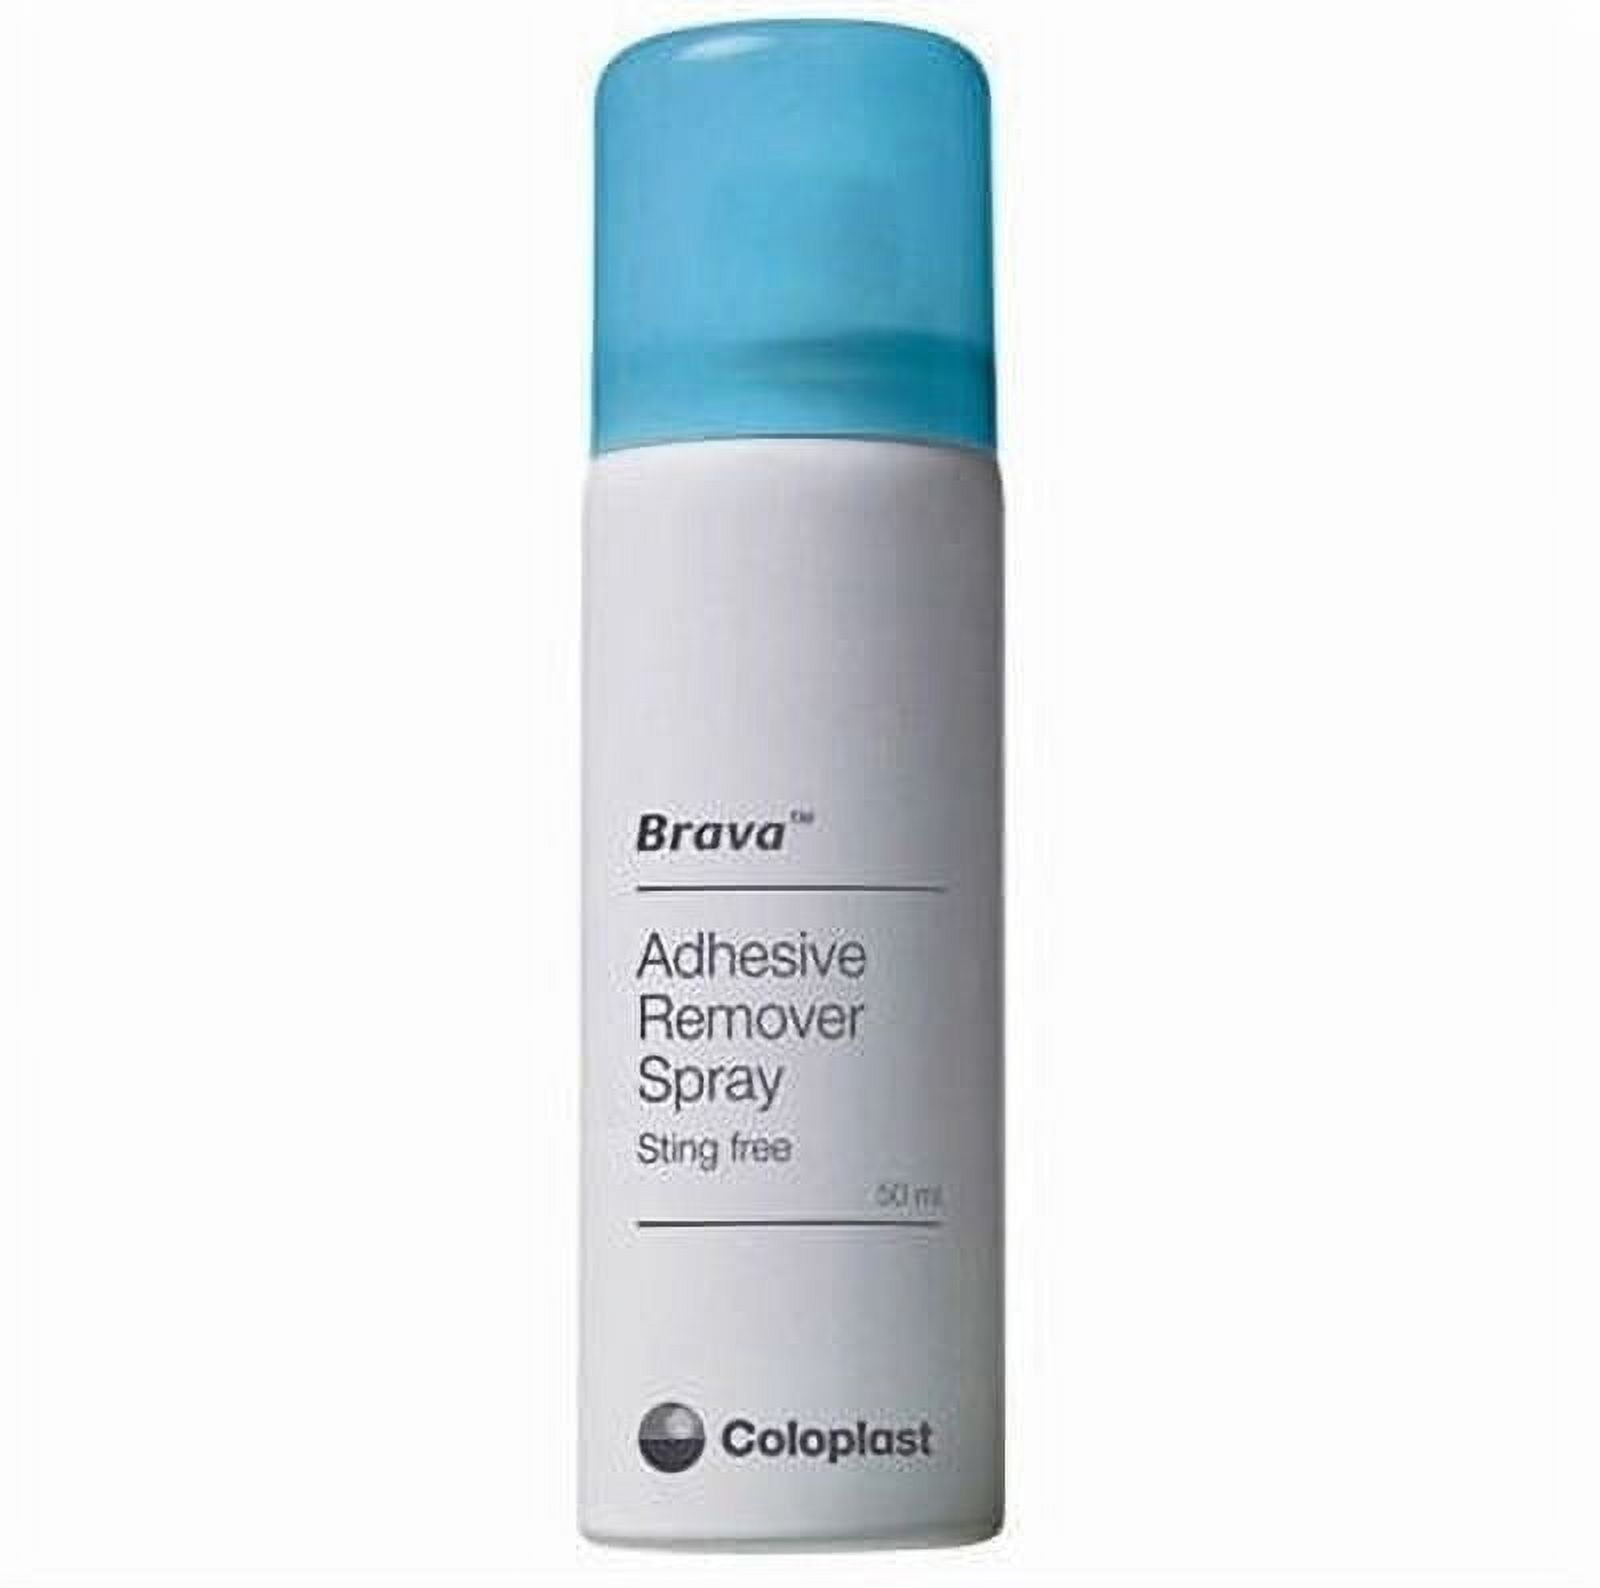 Buy Coloplast Brava Adhesive Remover Spray 50 ml Online at Best Price -  Creams/Oils/Lotions